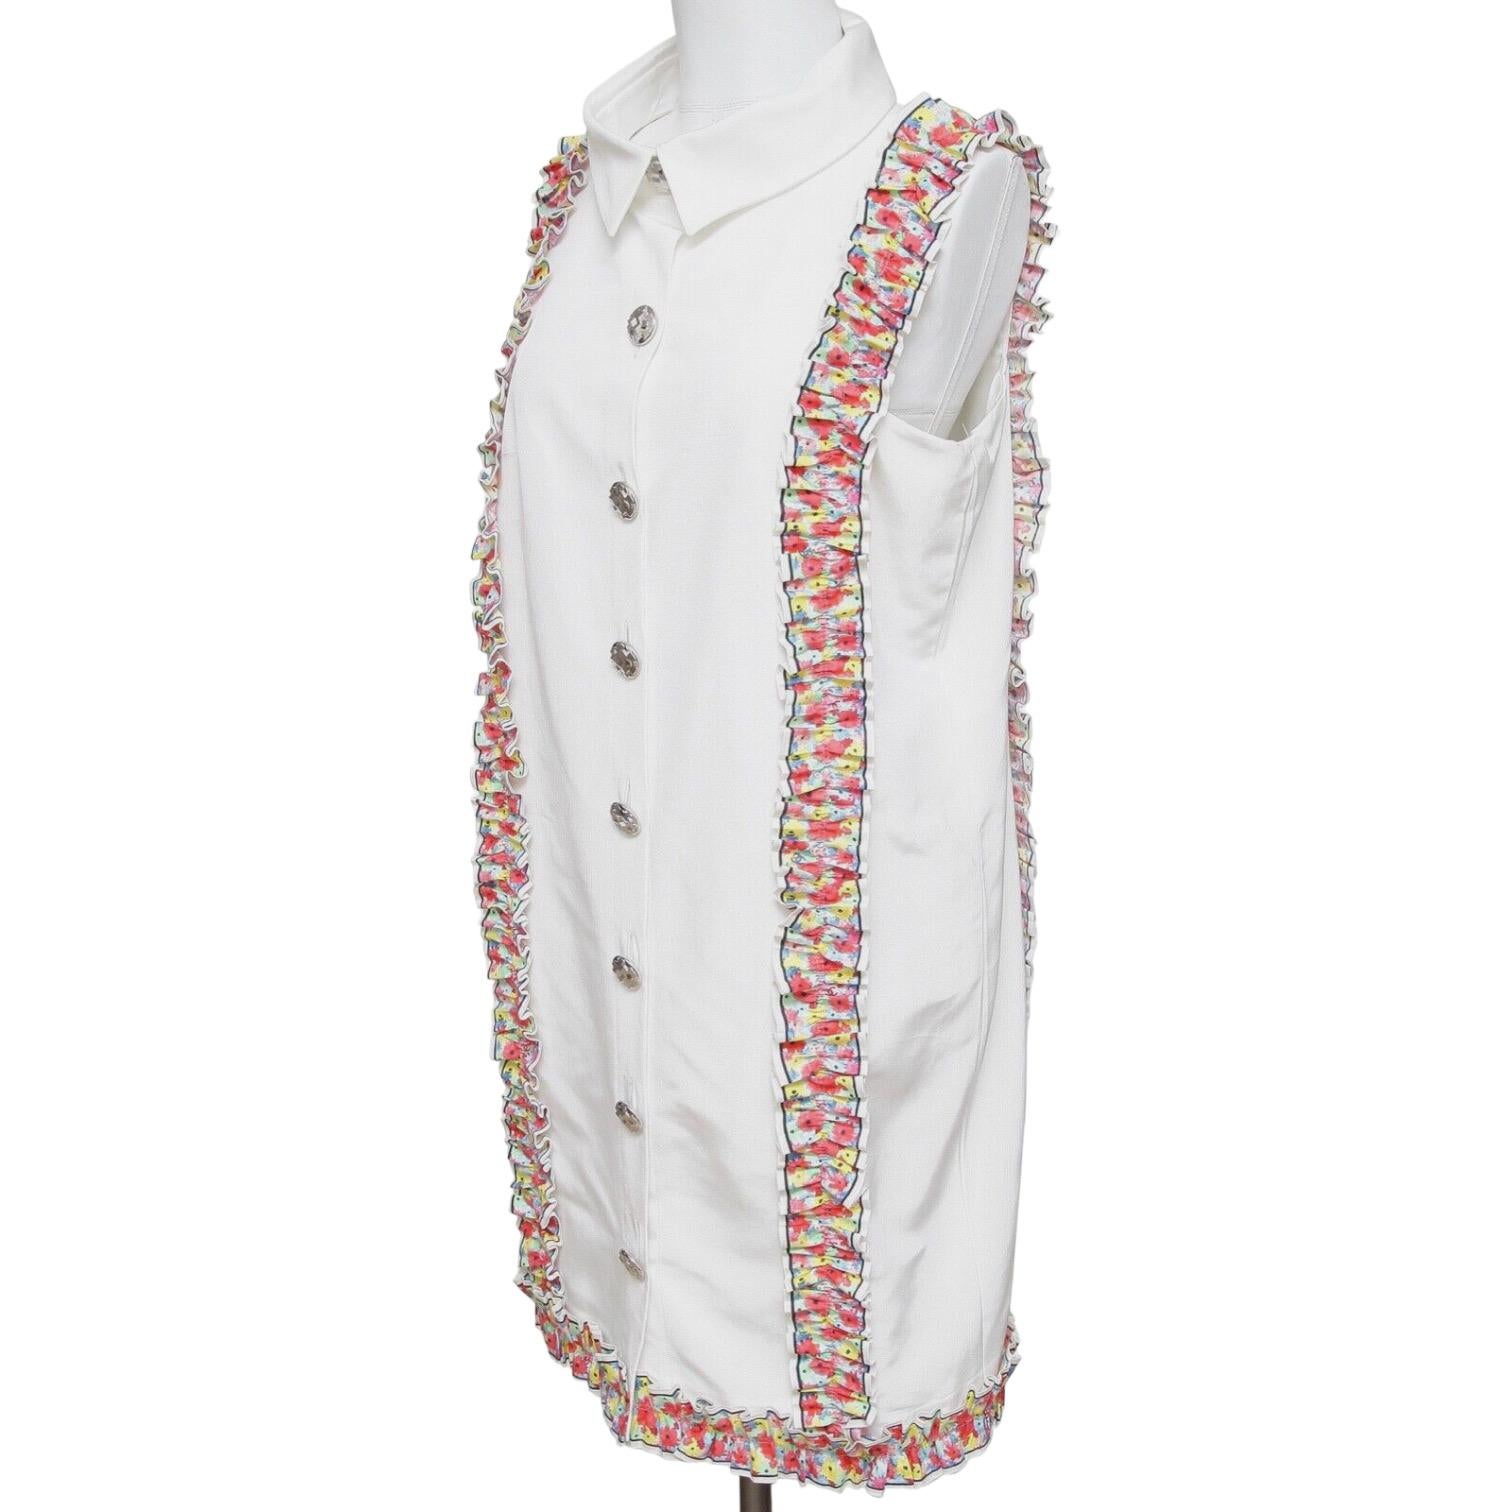 CHANEL Dress White Sleeveless Multicolor Floral Silver HW Collar 42 RUNWAY 2016 In Fair Condition In Hollywood, FL